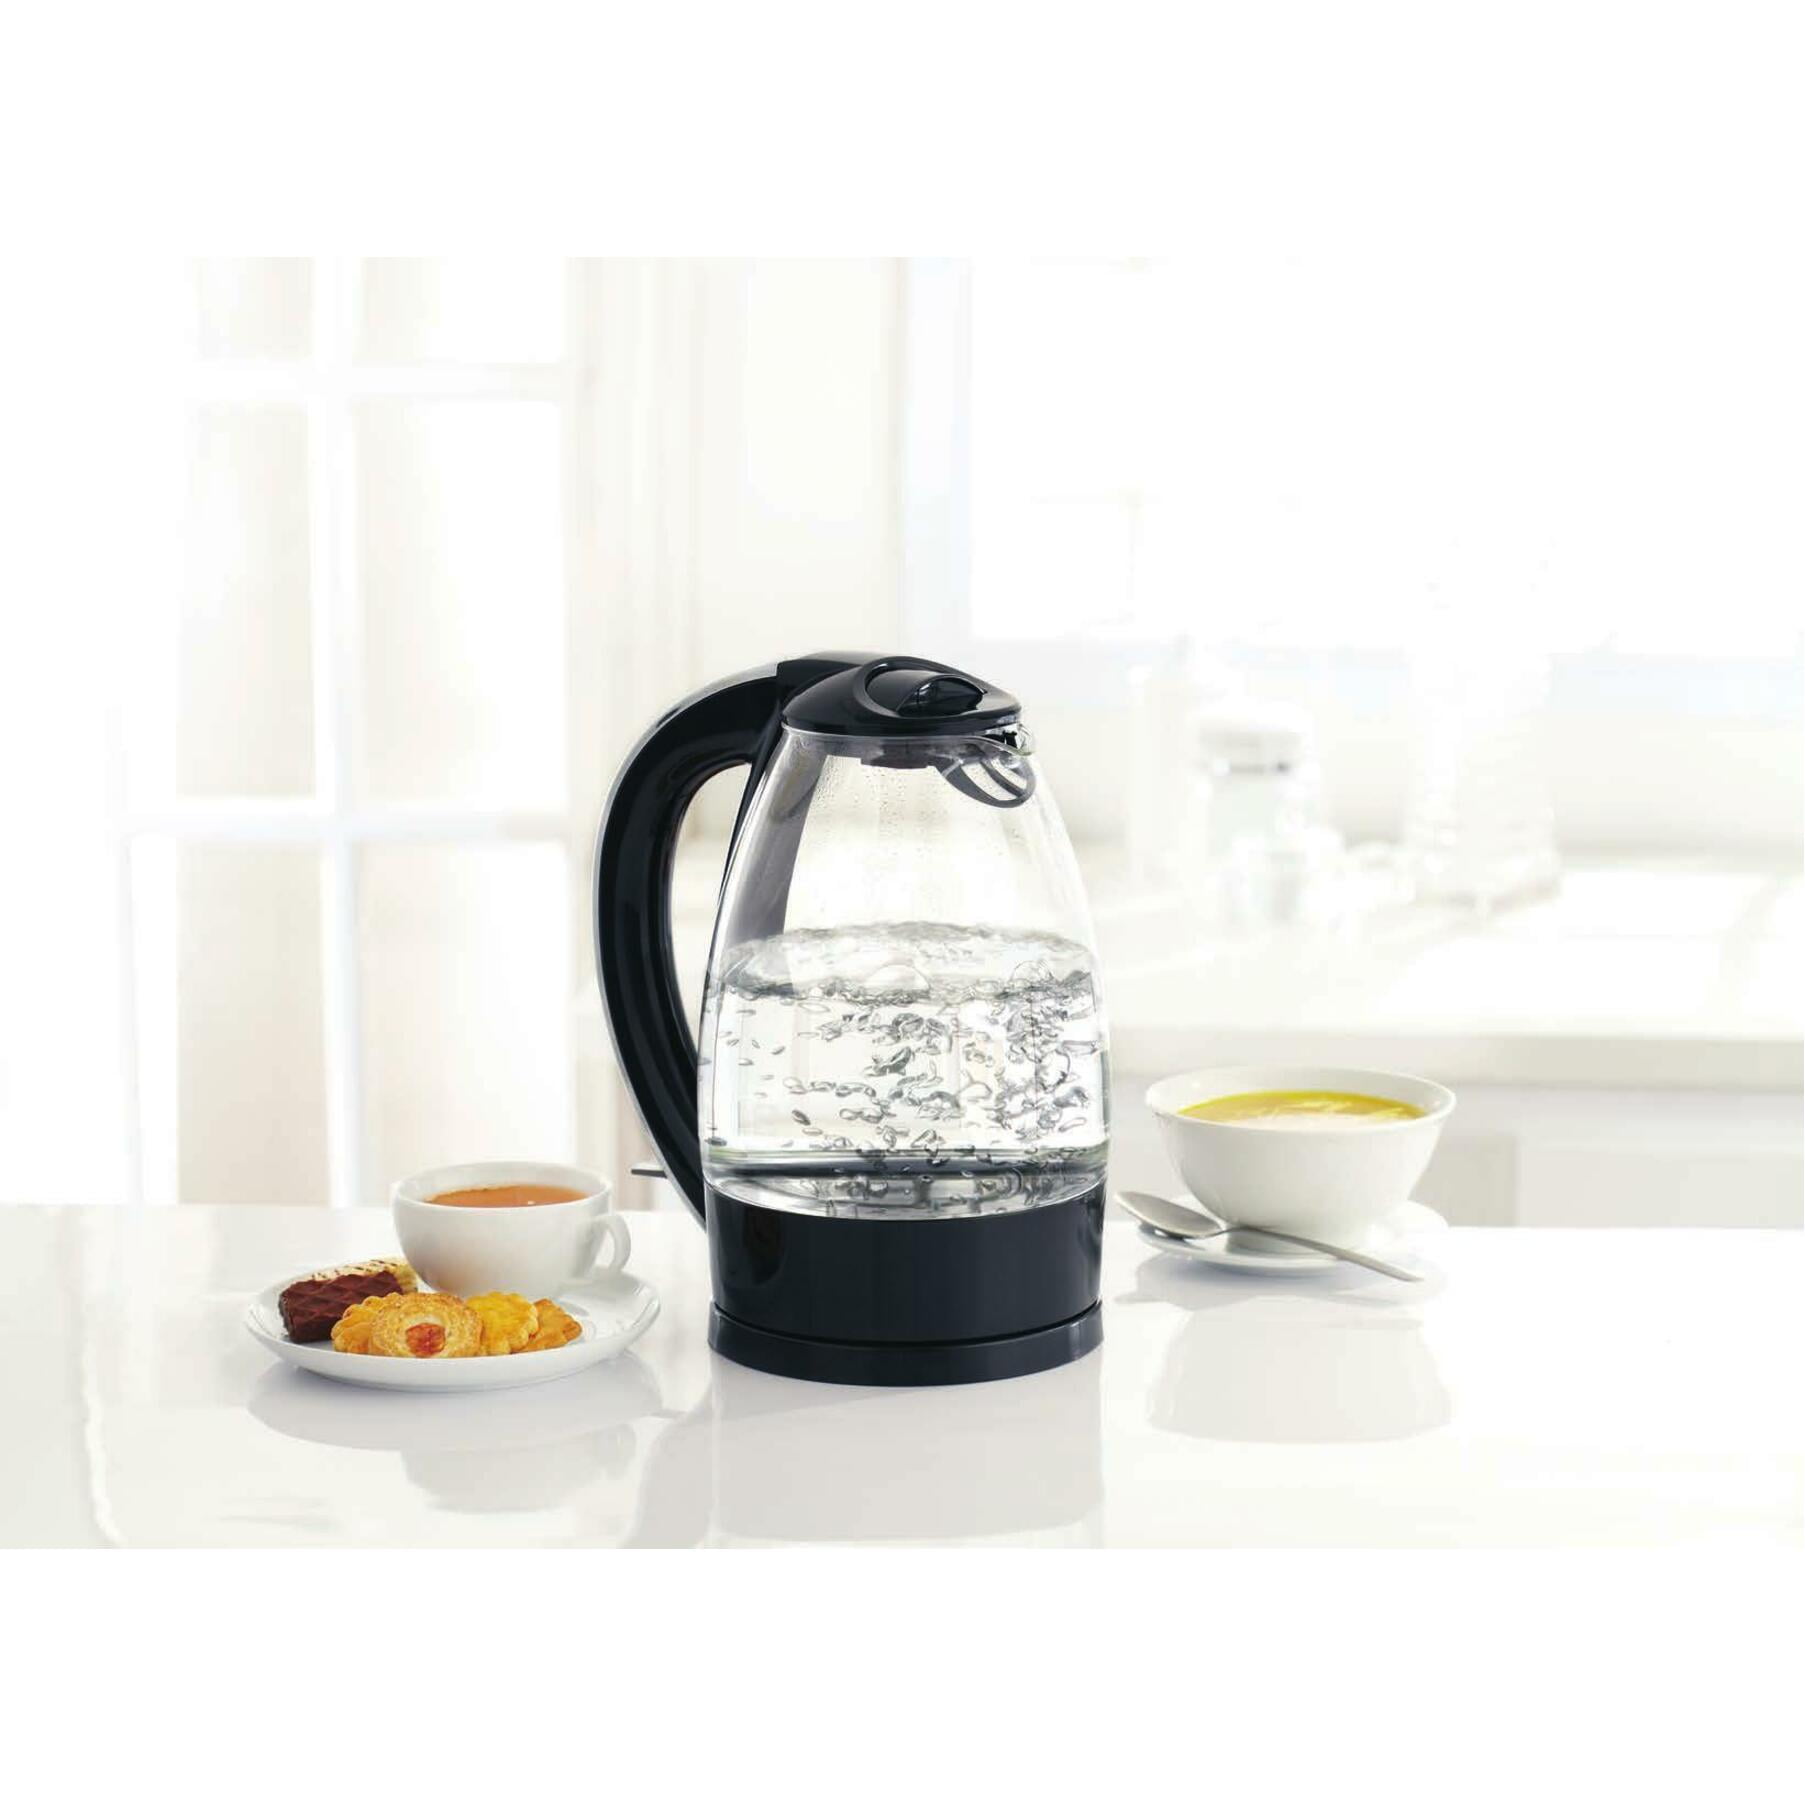 BELLA 1.7 Liter Glass Electric Kettle, Quickly Boil 7 Cups of Water in 6-7  Minutes, Soft Purple LED Lights Illuminate While Boiling, Cordless Portable